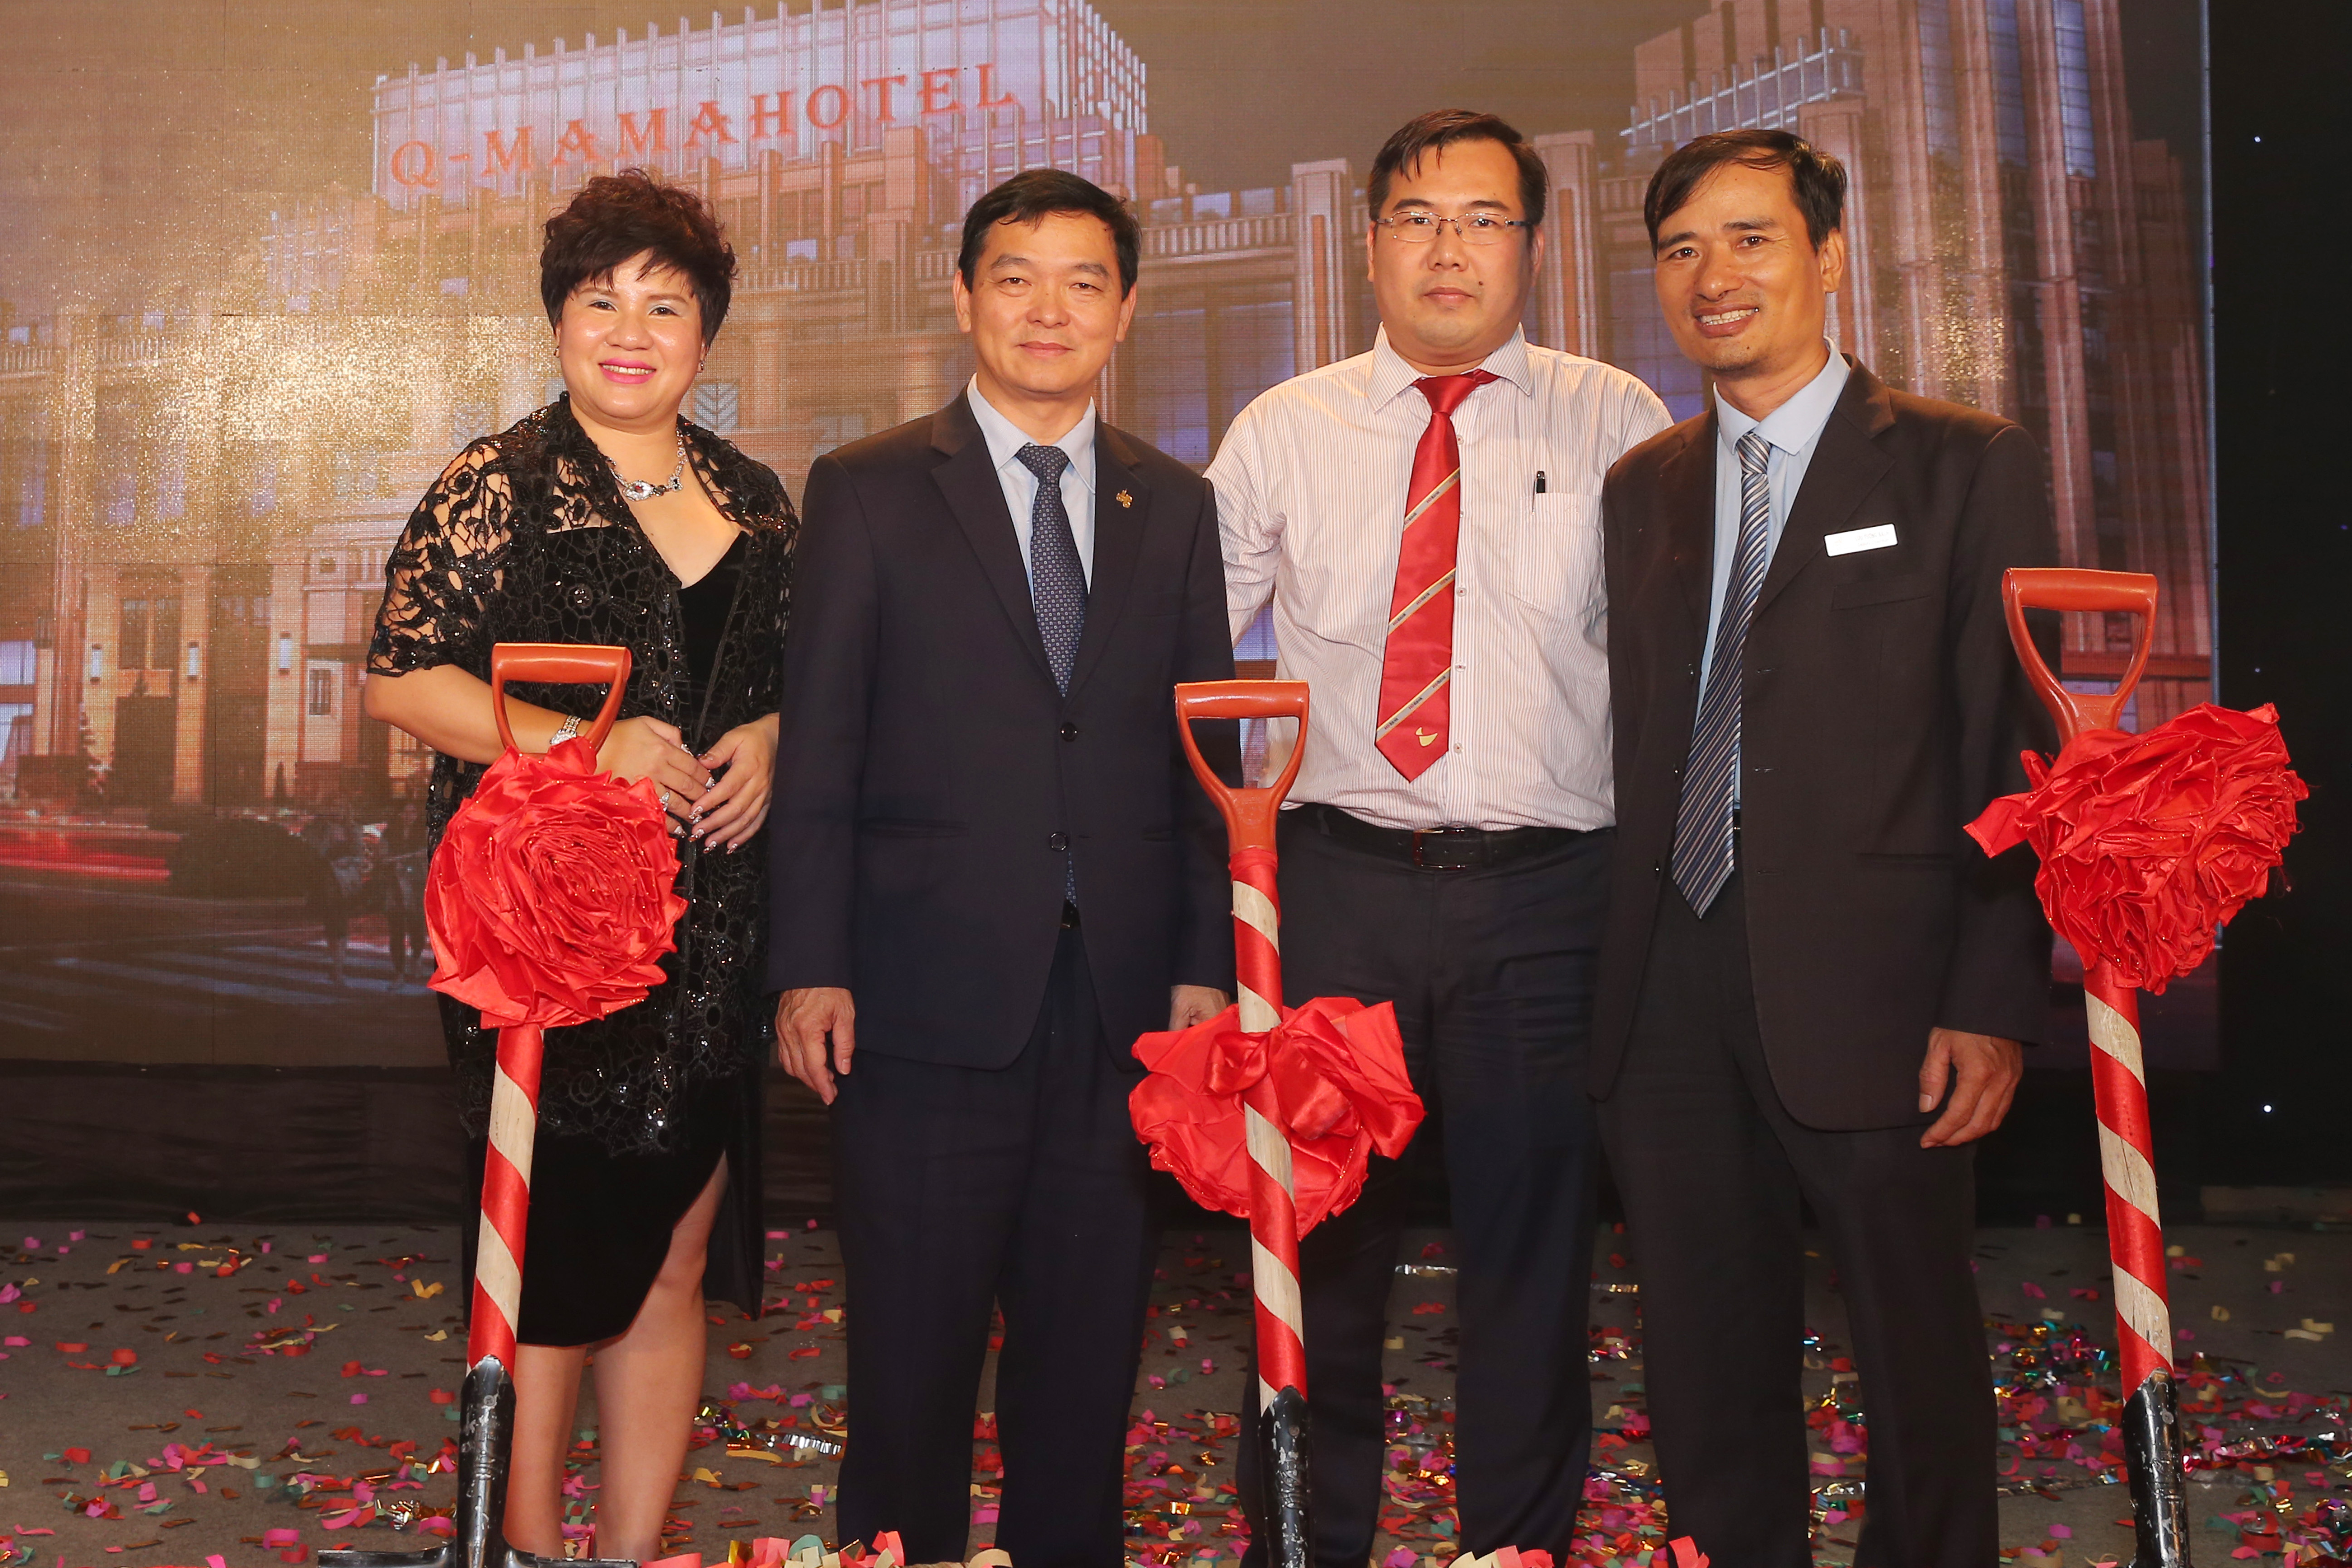 Q-Mama to enter Ho Chi Minh City five-star hotel scene in August 2018